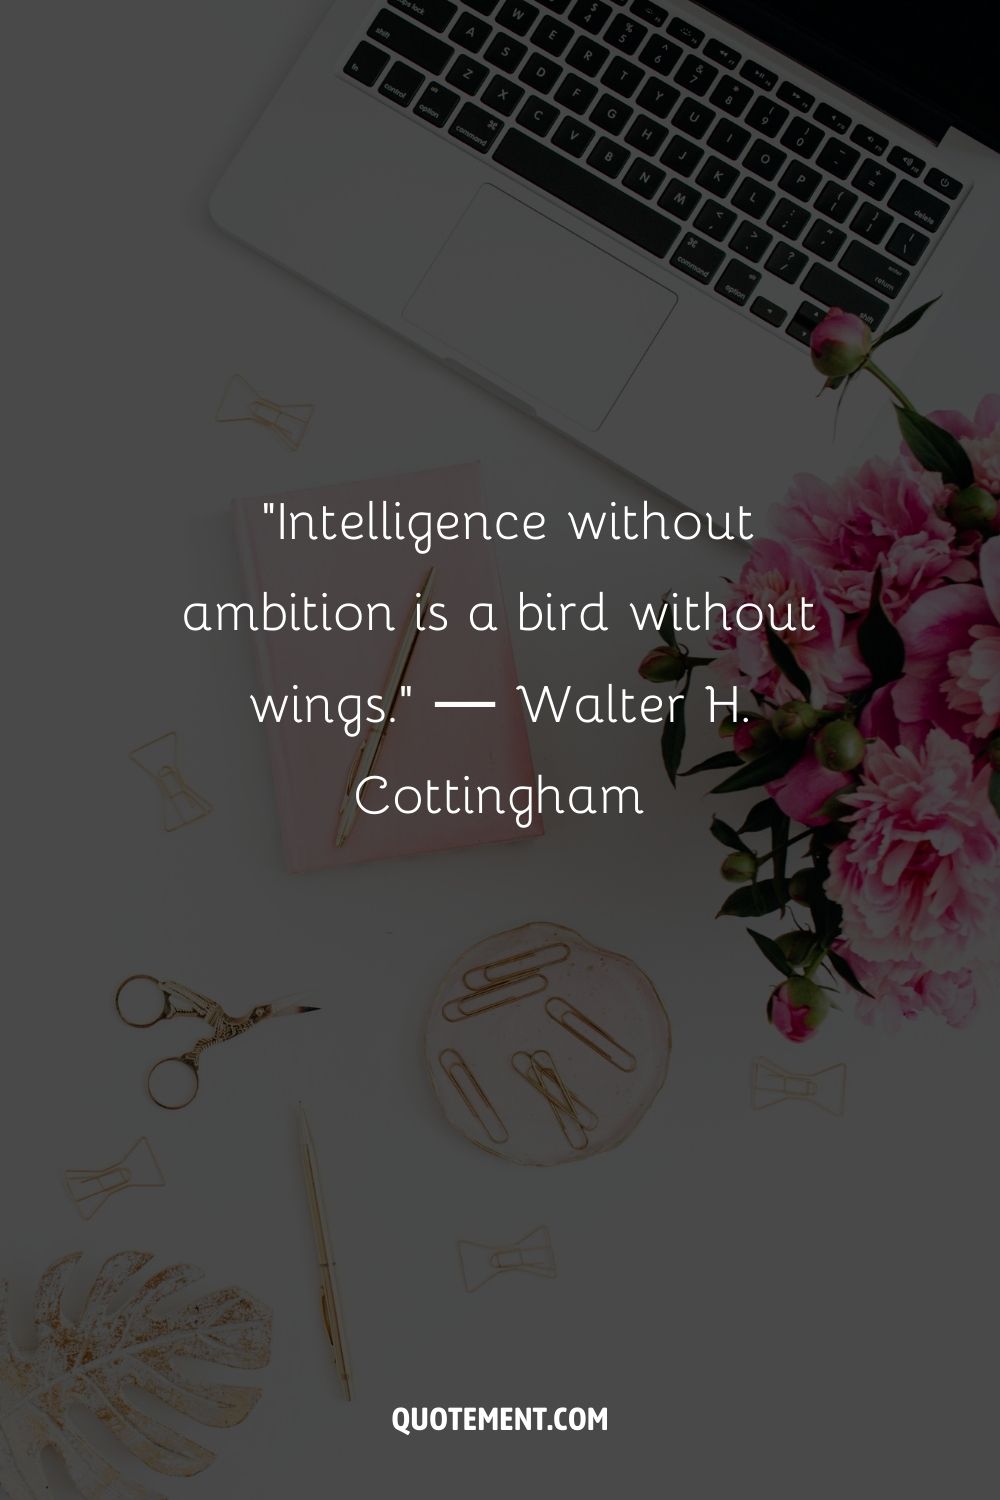 “Intelligence without ambition is a bird without wings.” ― Walter H. Cottingham